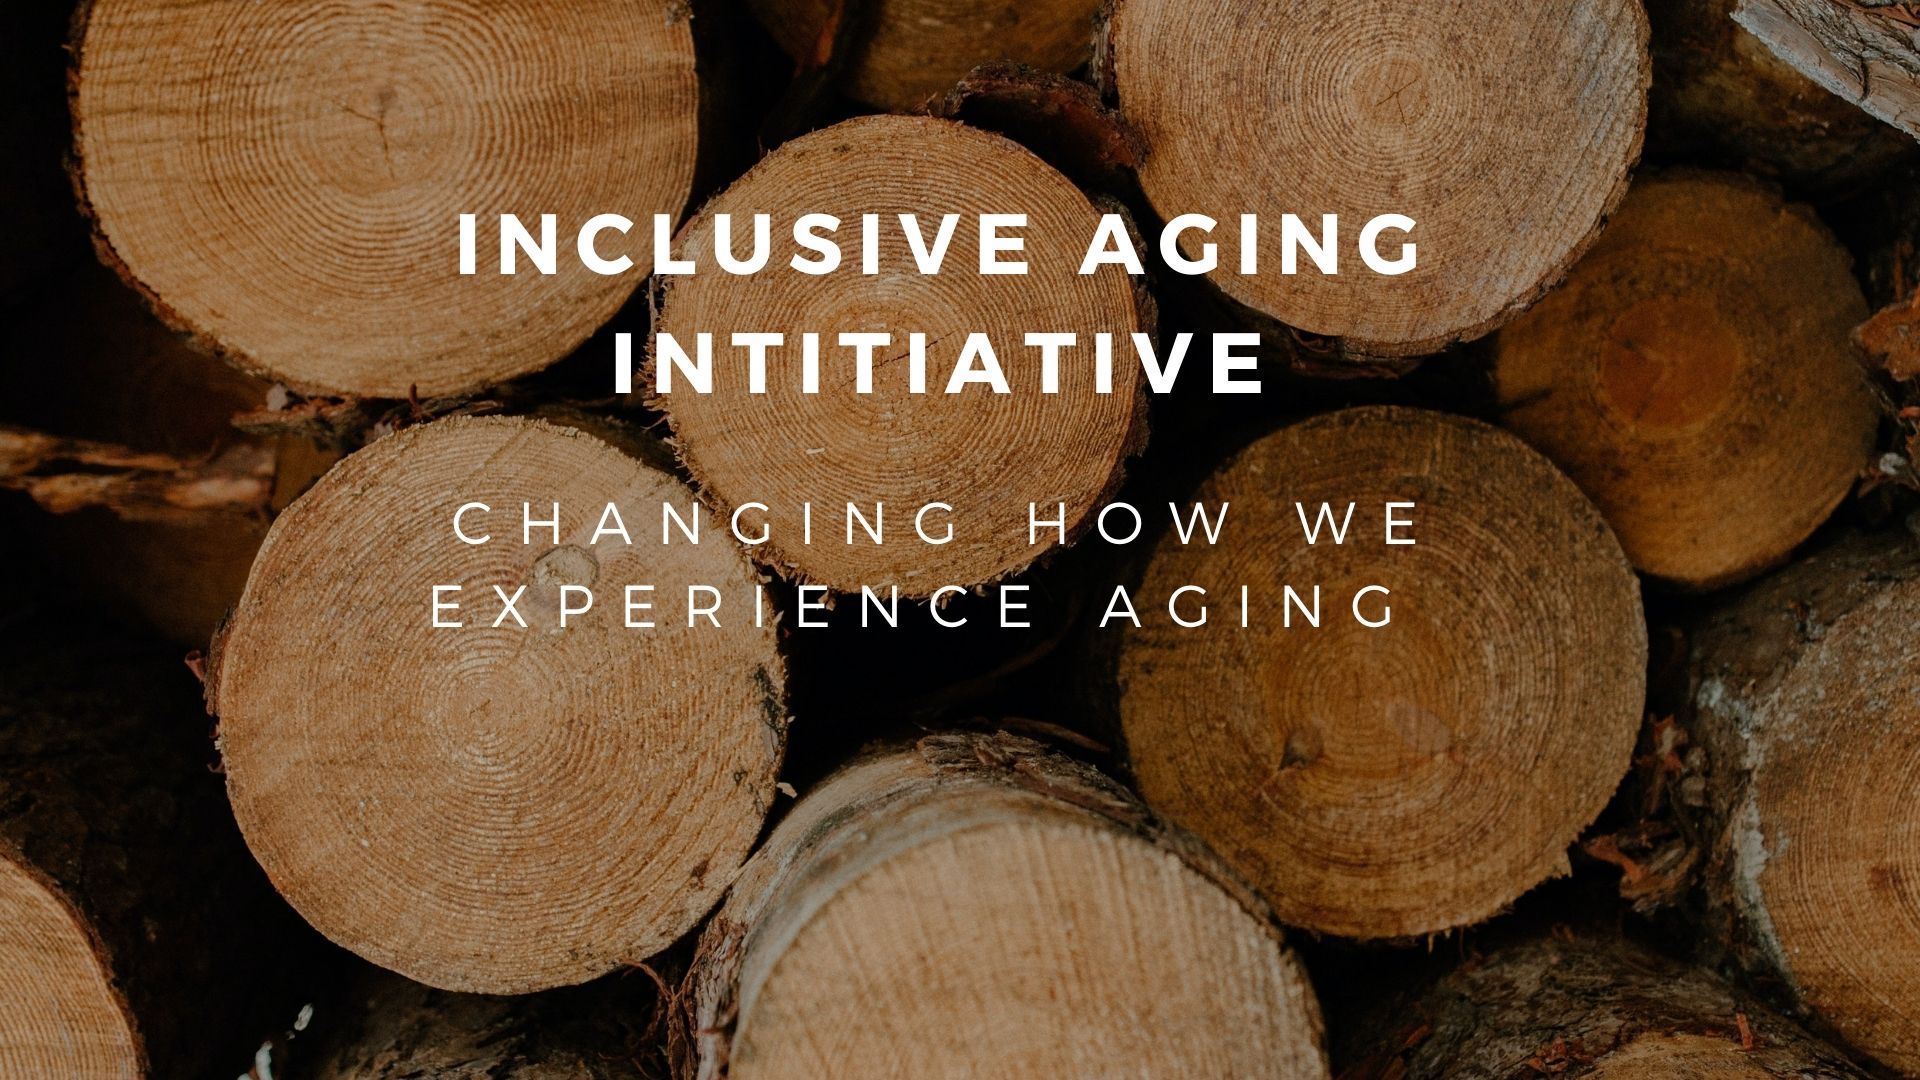 Inclusive Aging Initiative. Changing how we experience aging